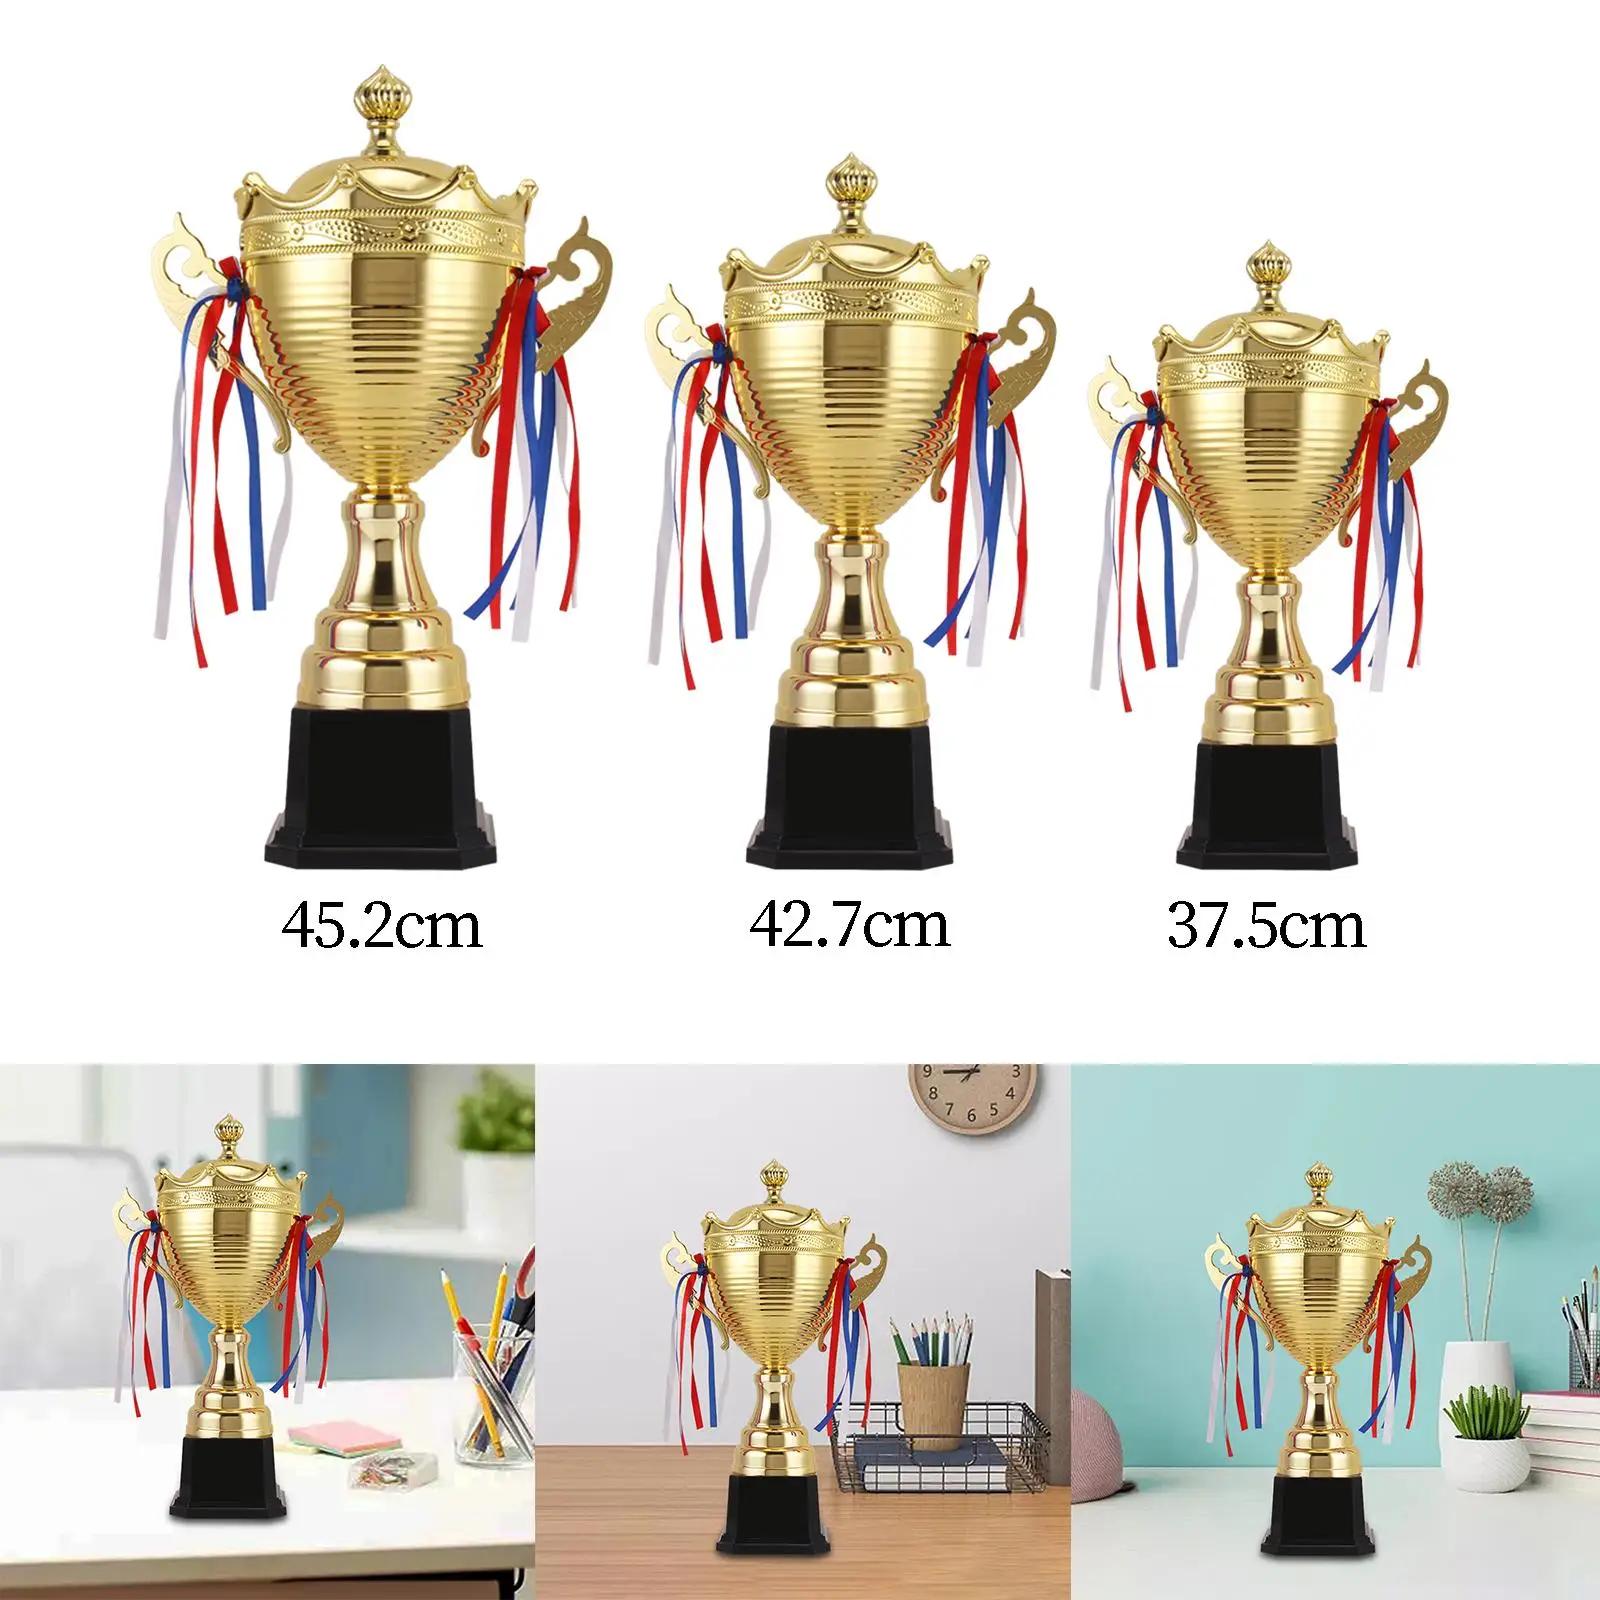 Metal Winner Award Trophies Cup Gold Color Lightweight Decorative Multifunctional Winning Prizes Party Favors for Awards Parties